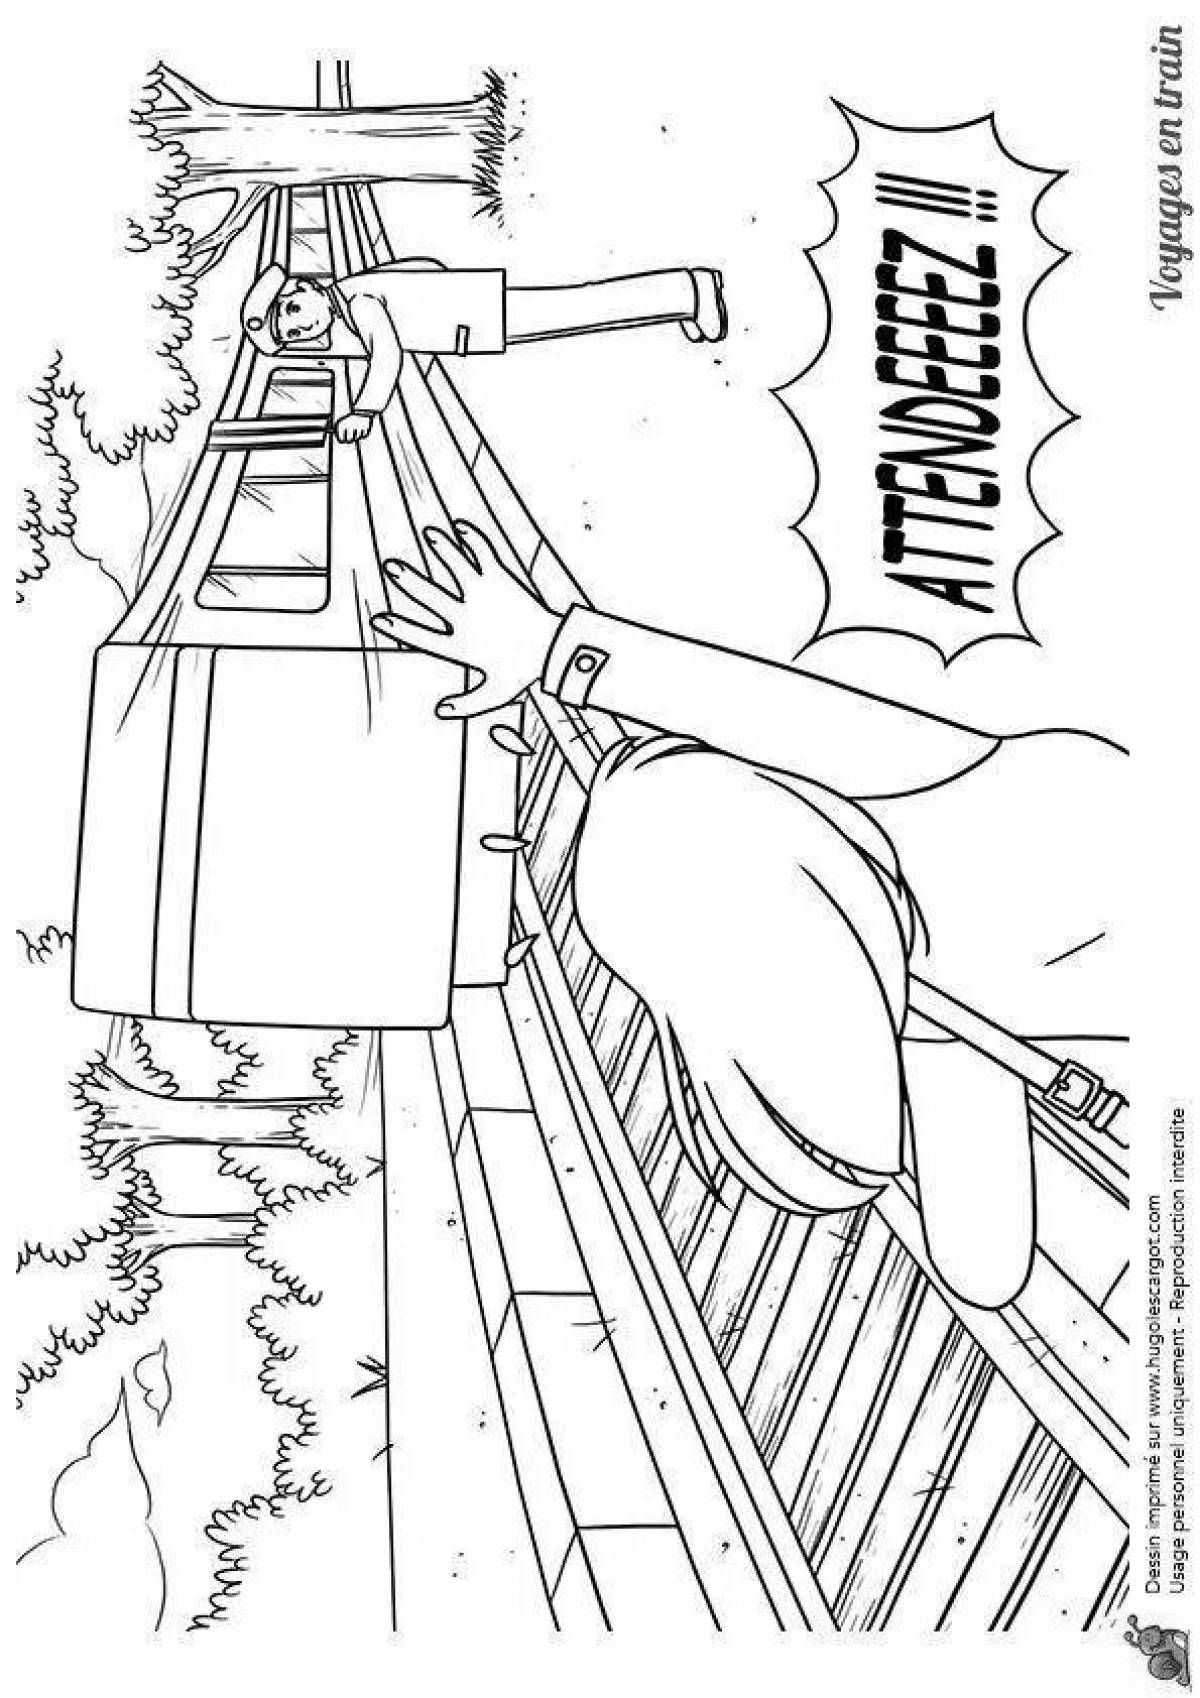 Coloring page playful train eater